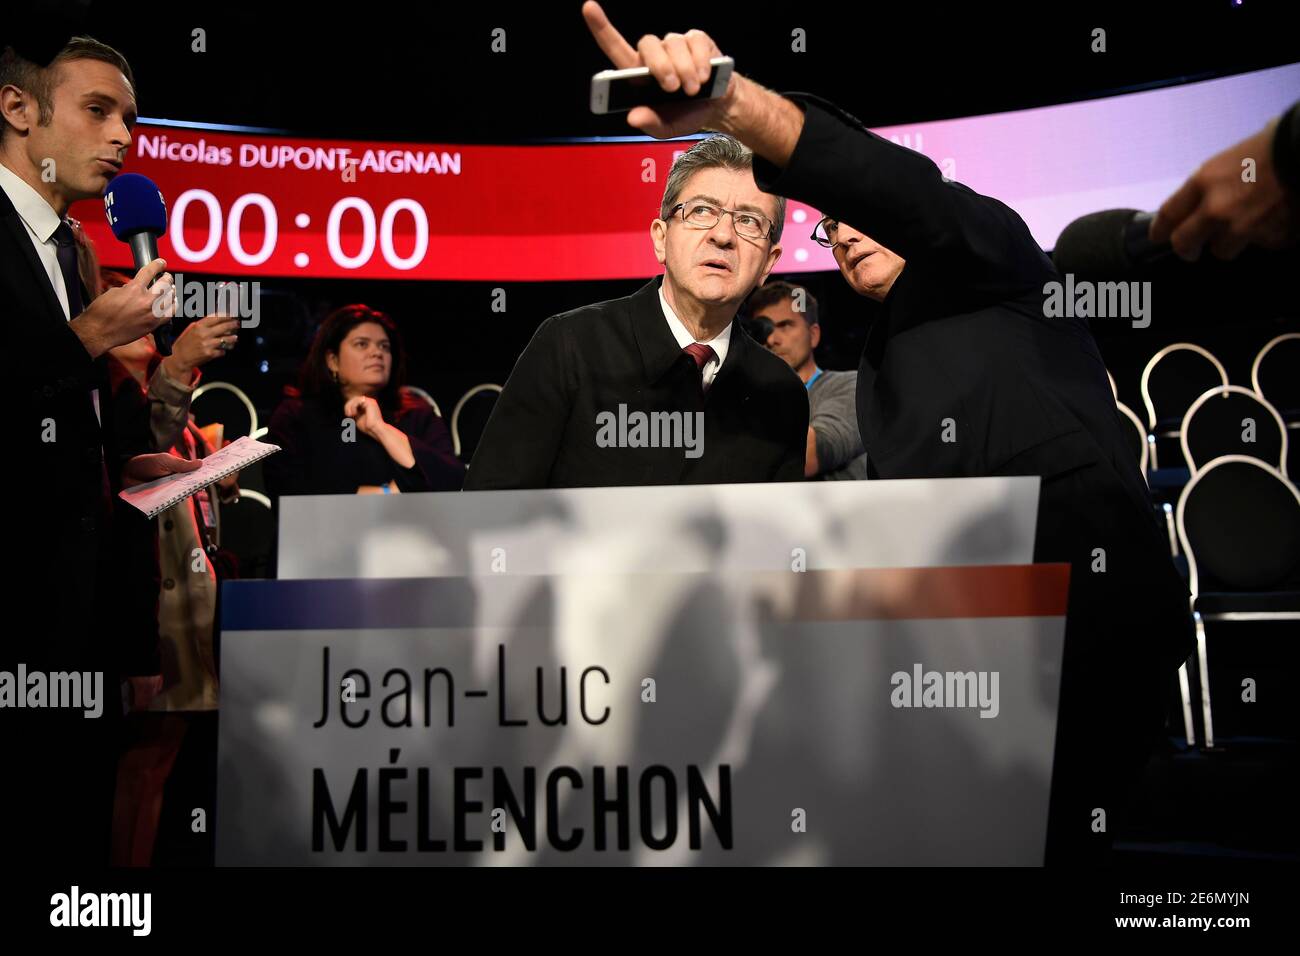 Jean luc melenchon television hi-res stock photography and images - Alamy